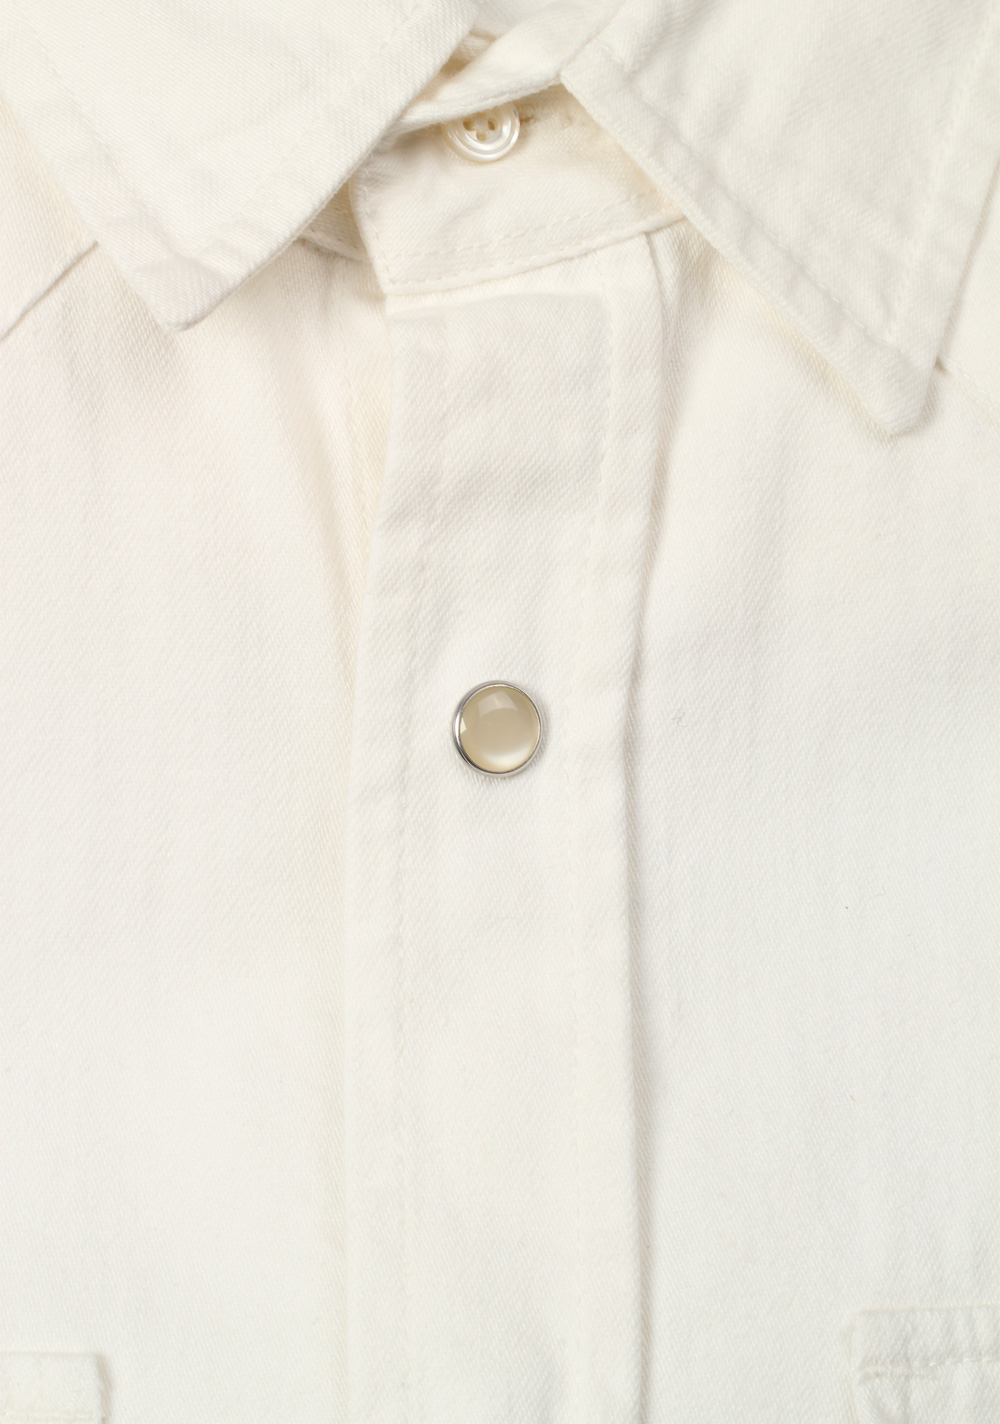 TOM FORD Solid White Casual Western Shirt Size 38 / 15 U.S. | Costume Limité